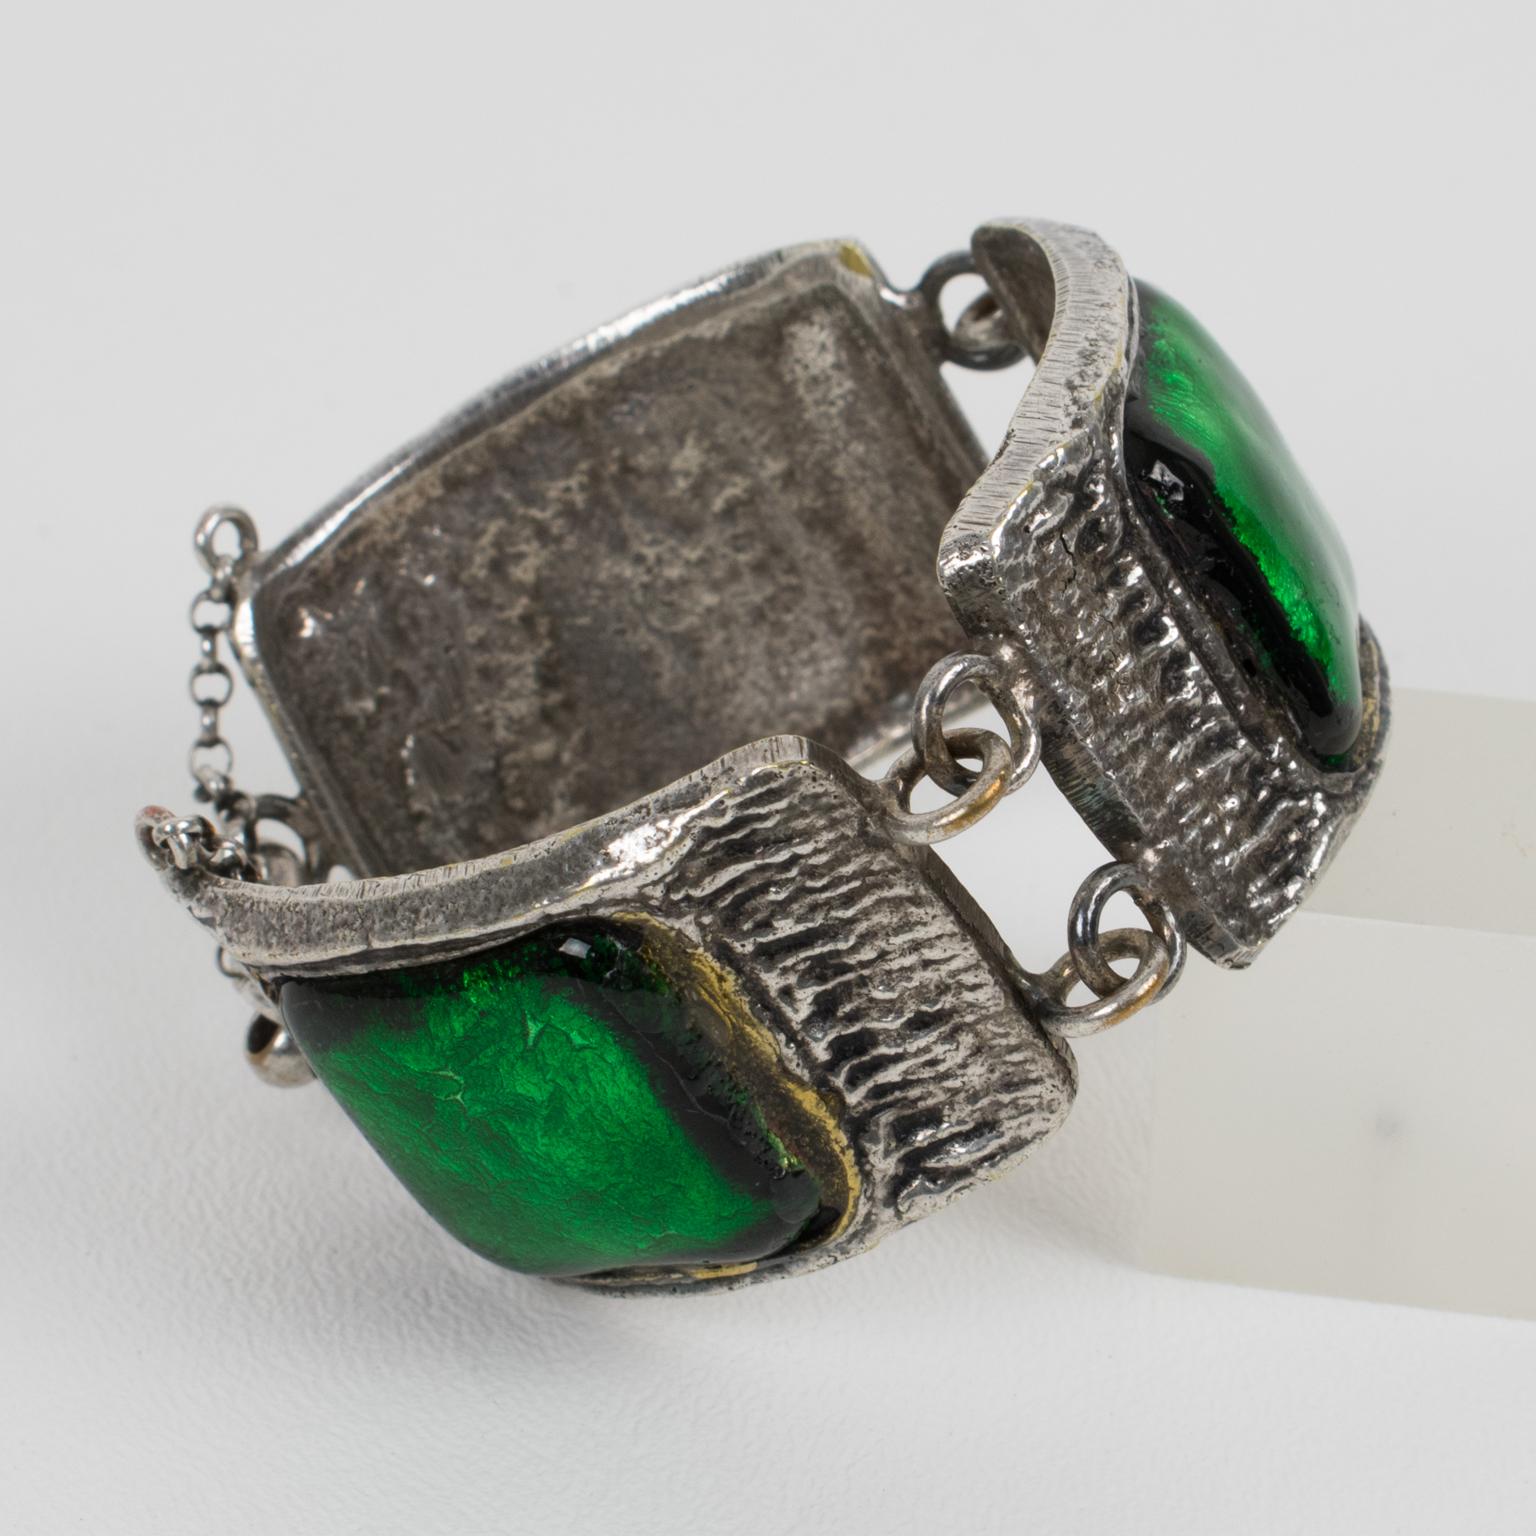 French Designer Willy Silvered Bronze and Green Glass Link Bracelet, 1950s For Sale 1